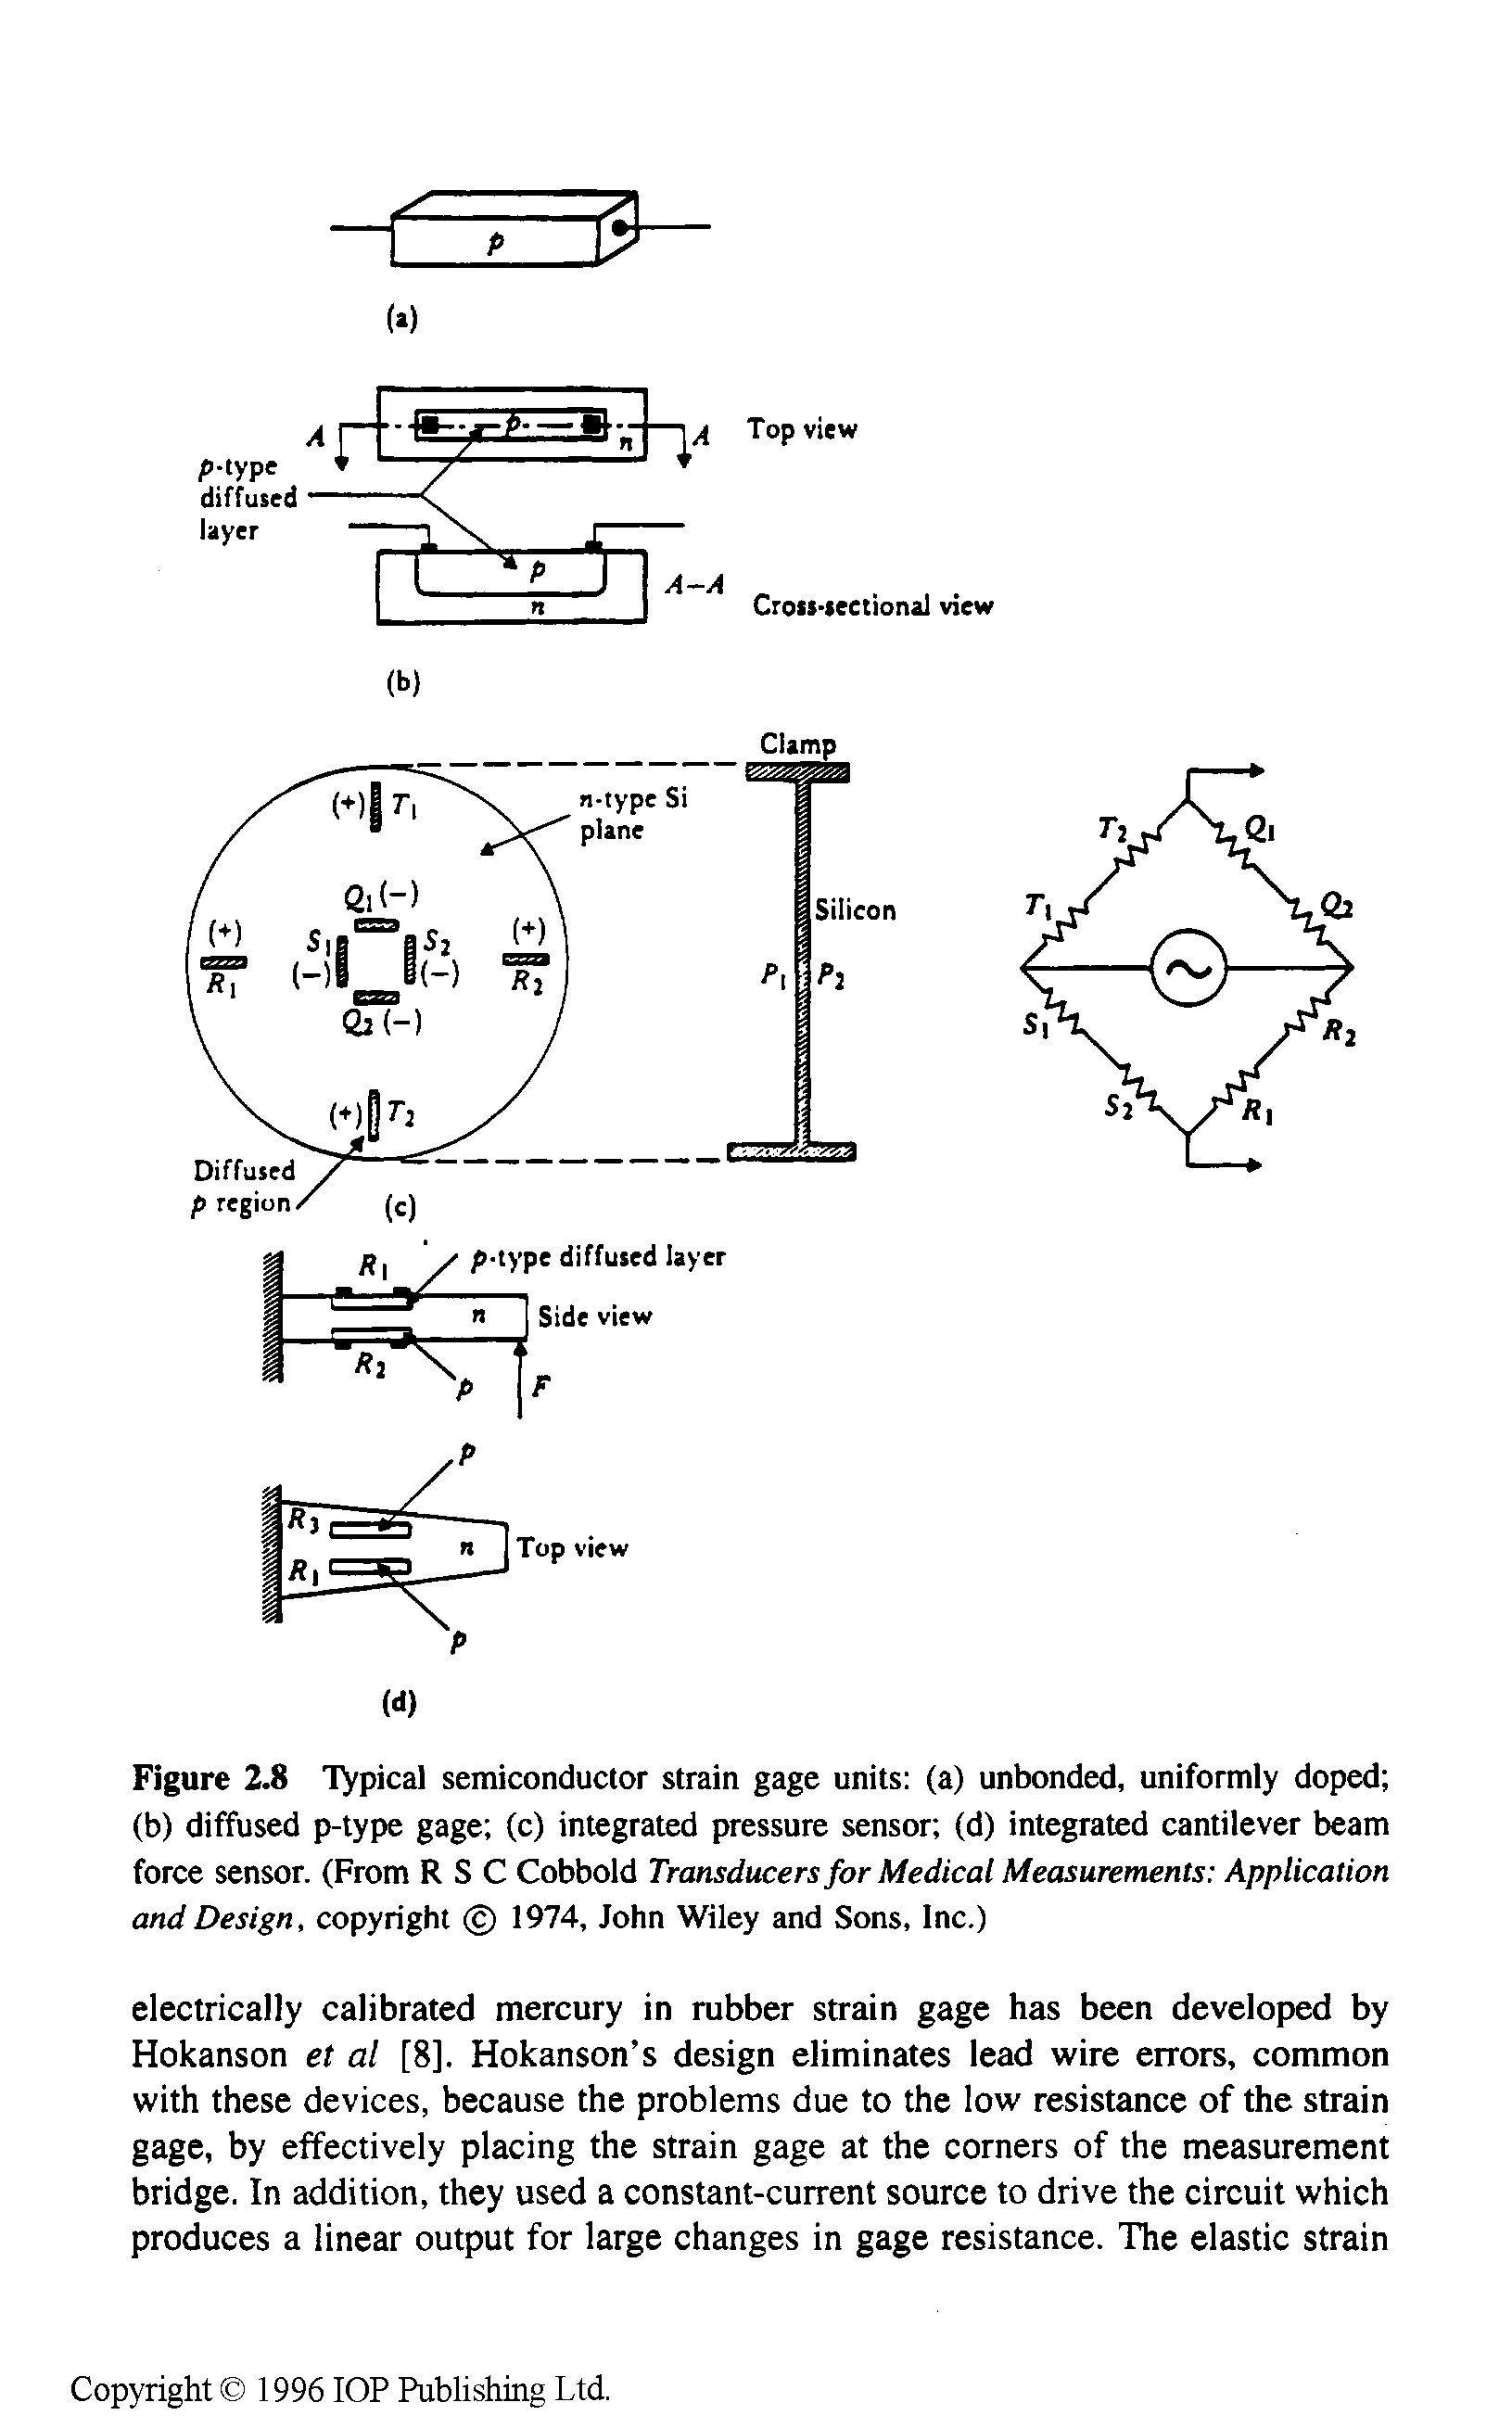 Figure 2.8 Typical semiconductor strain gage units (a) unbonded, uniformly doped (b) diffused p-type gage (c) integrated pressure sensor (d) integrated cantilever beam force sensor. (From R S C Cobbold Transducers for Medical Measurements Application and Design, copyright 1974, John Wiley and Sons, Inc.)...